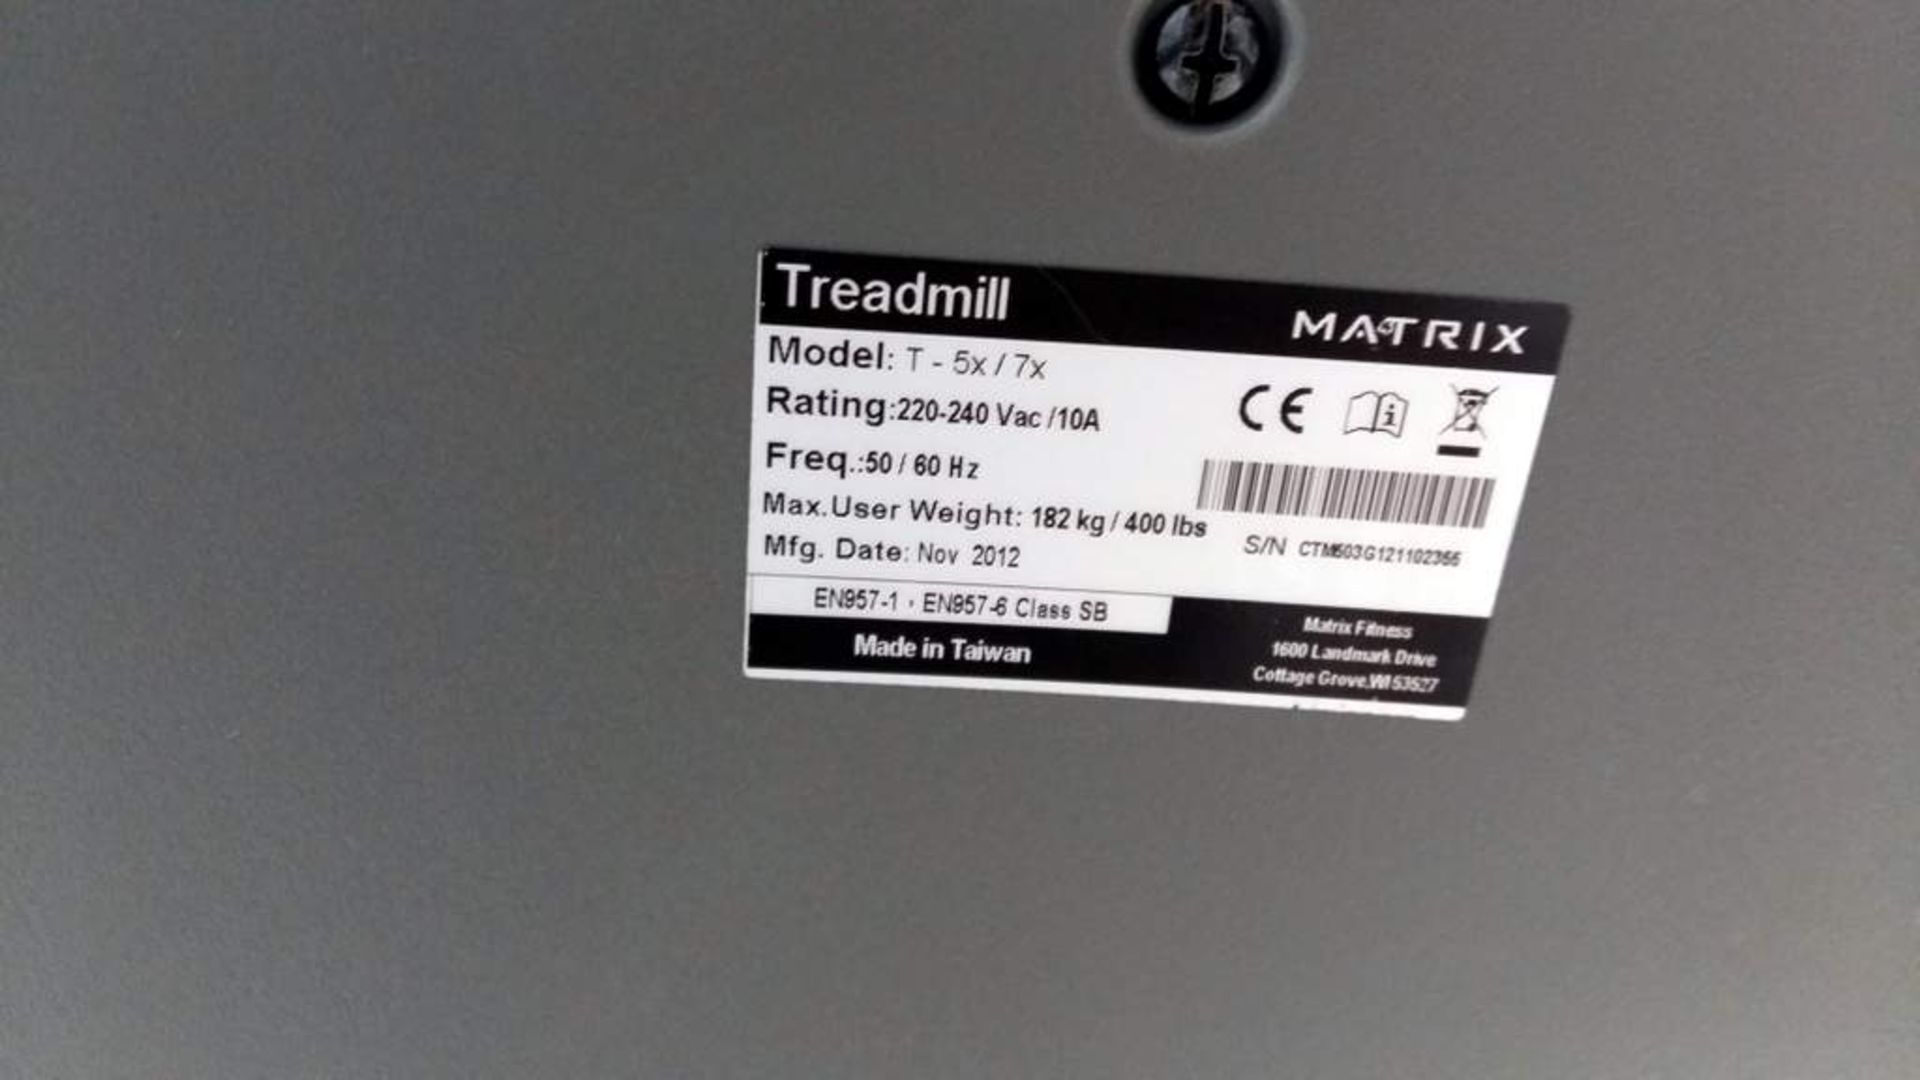 Matrix treadmill with active console Model: T7xe - Max user weight 182kg - 240v - Image 18 of 18